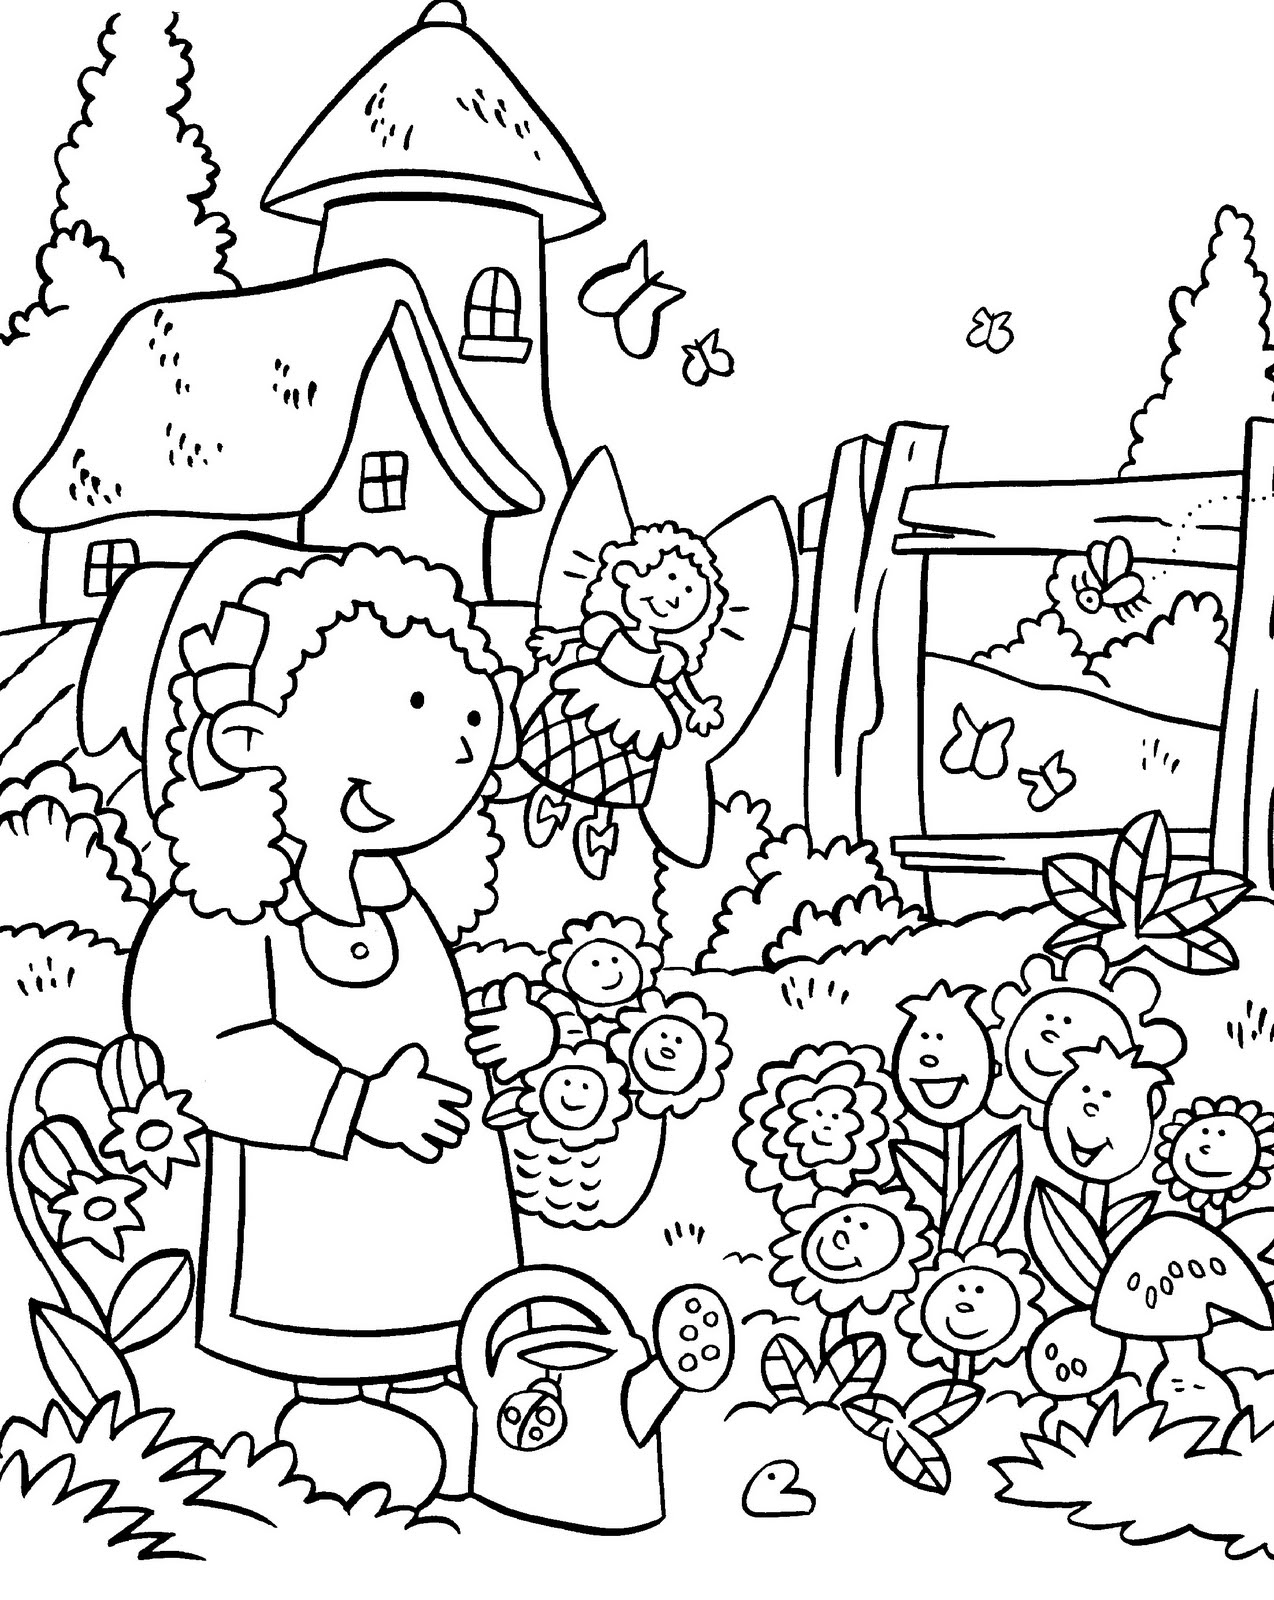 garden-coloring-pages-to-download-and-print-for-free